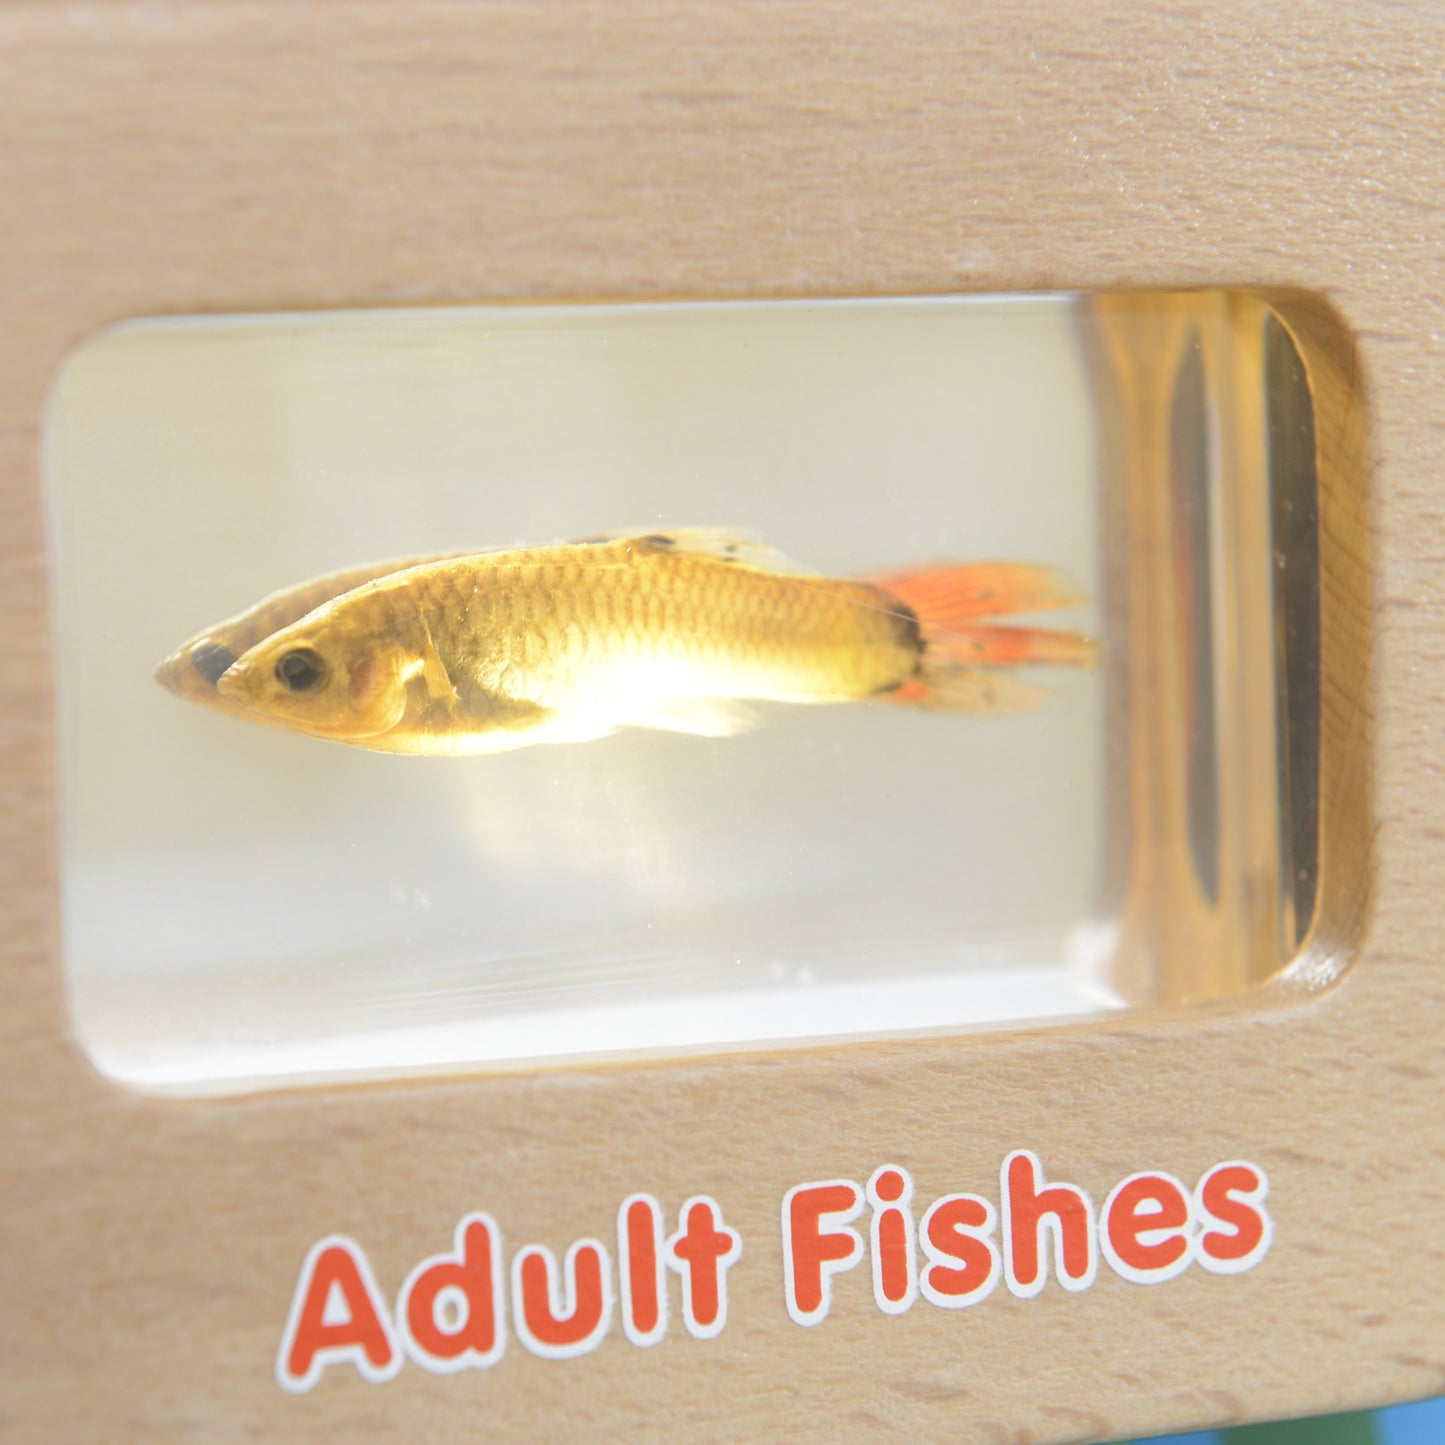 Masterkidz Wall Elements - Light-Up Fish Life Cycle Stages Panel 牆面遊戲-魚成長階段標本探索燈板